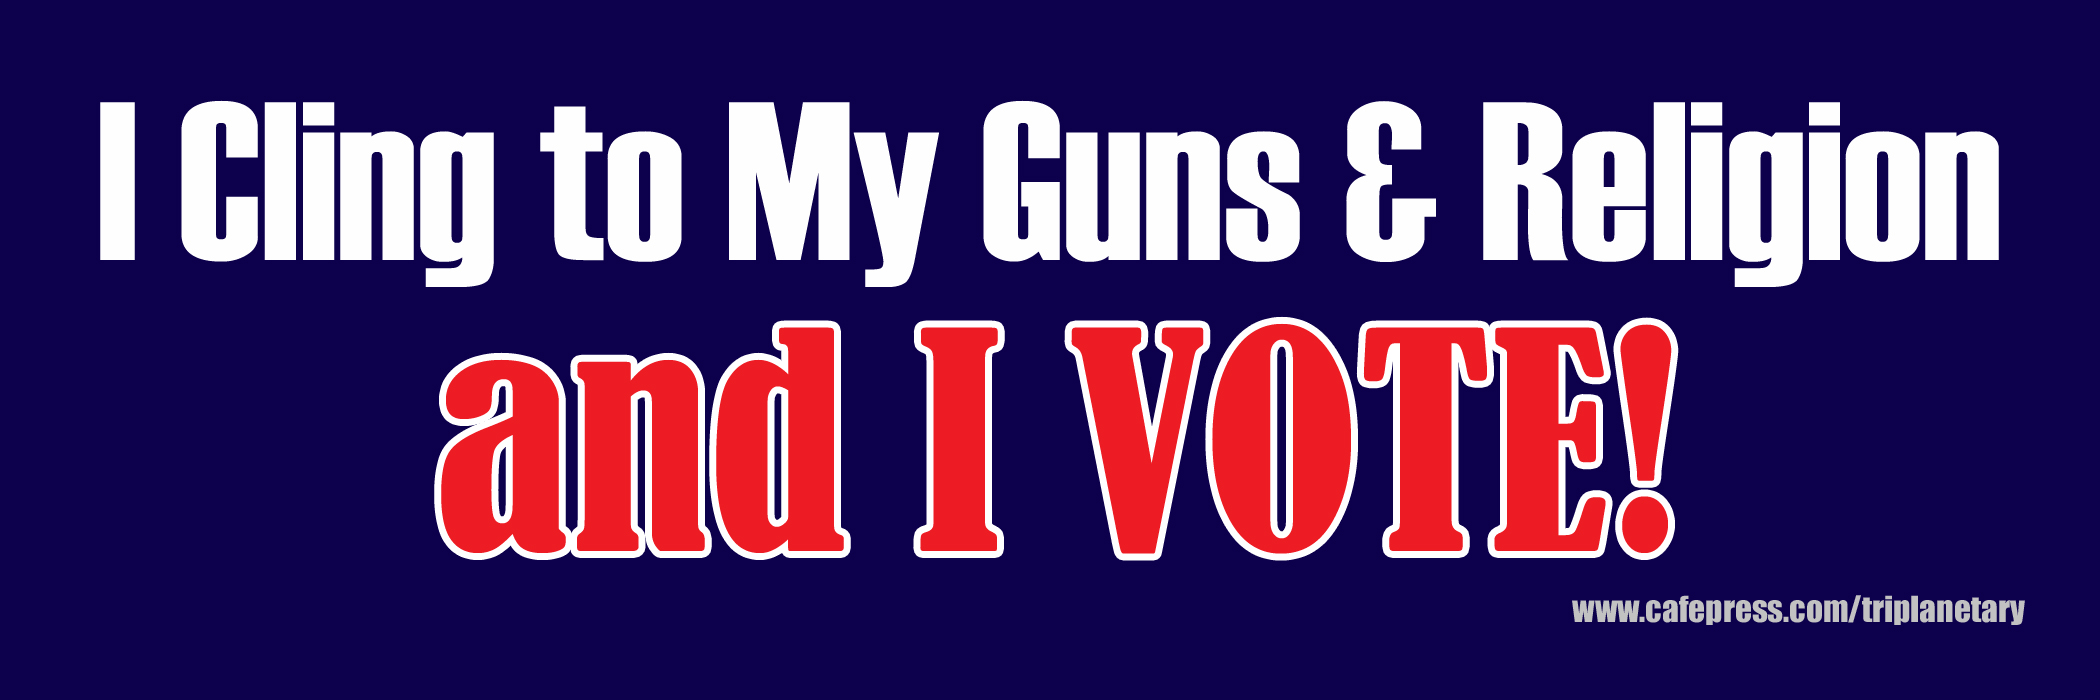 Red, white, and blue image of bumper sticker: 'I Cling to My Guns and Religion AND I VOTE!'